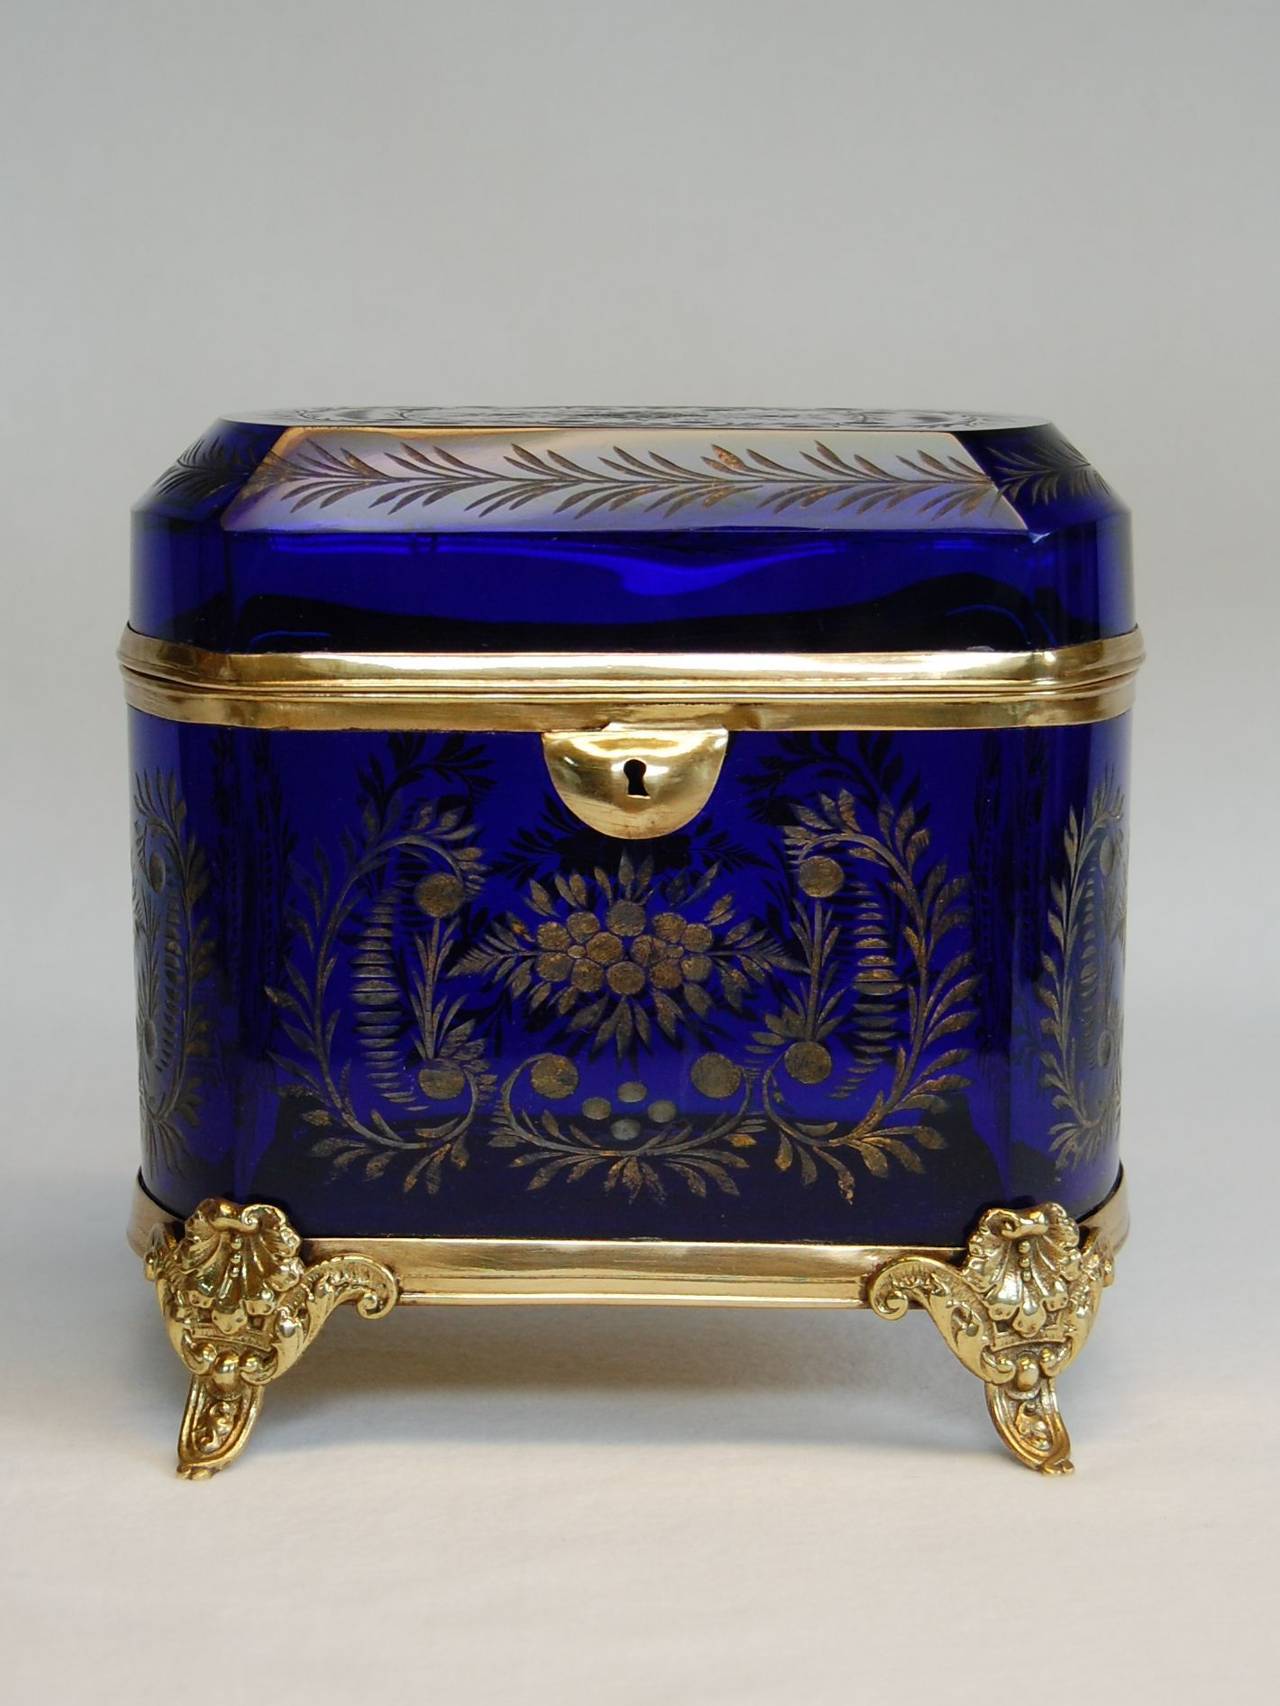 Large antique cut glass lidded box, likely by Moser, 1880s. Beautifully cut floral design with much of the original gilding remaining. Metal is in bright gold finish, hinge and framework are all tight, key is missing.